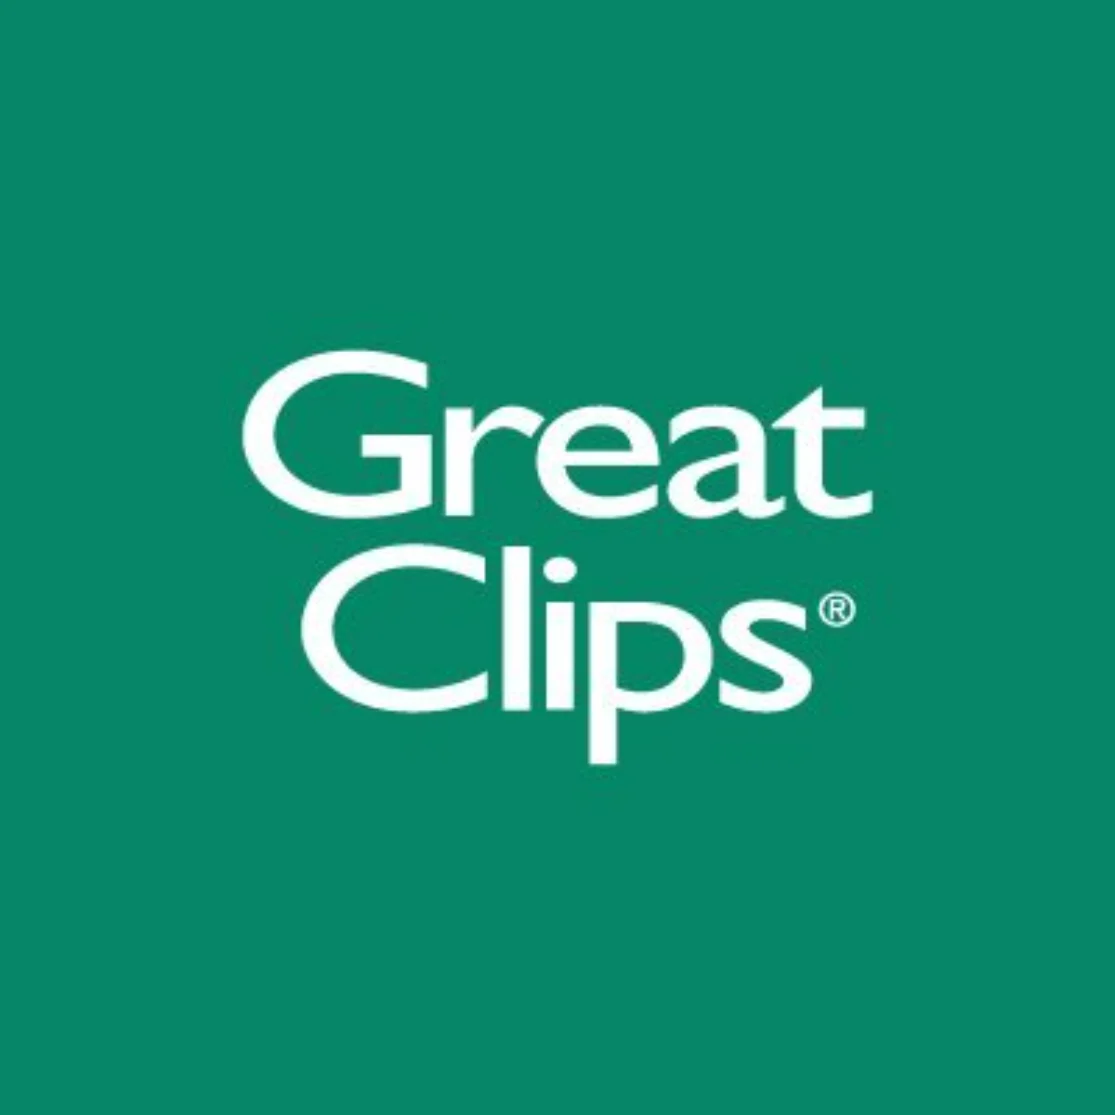 Current Great Clips Coupons And Promotions For At Least 5% Off Select Products & Services